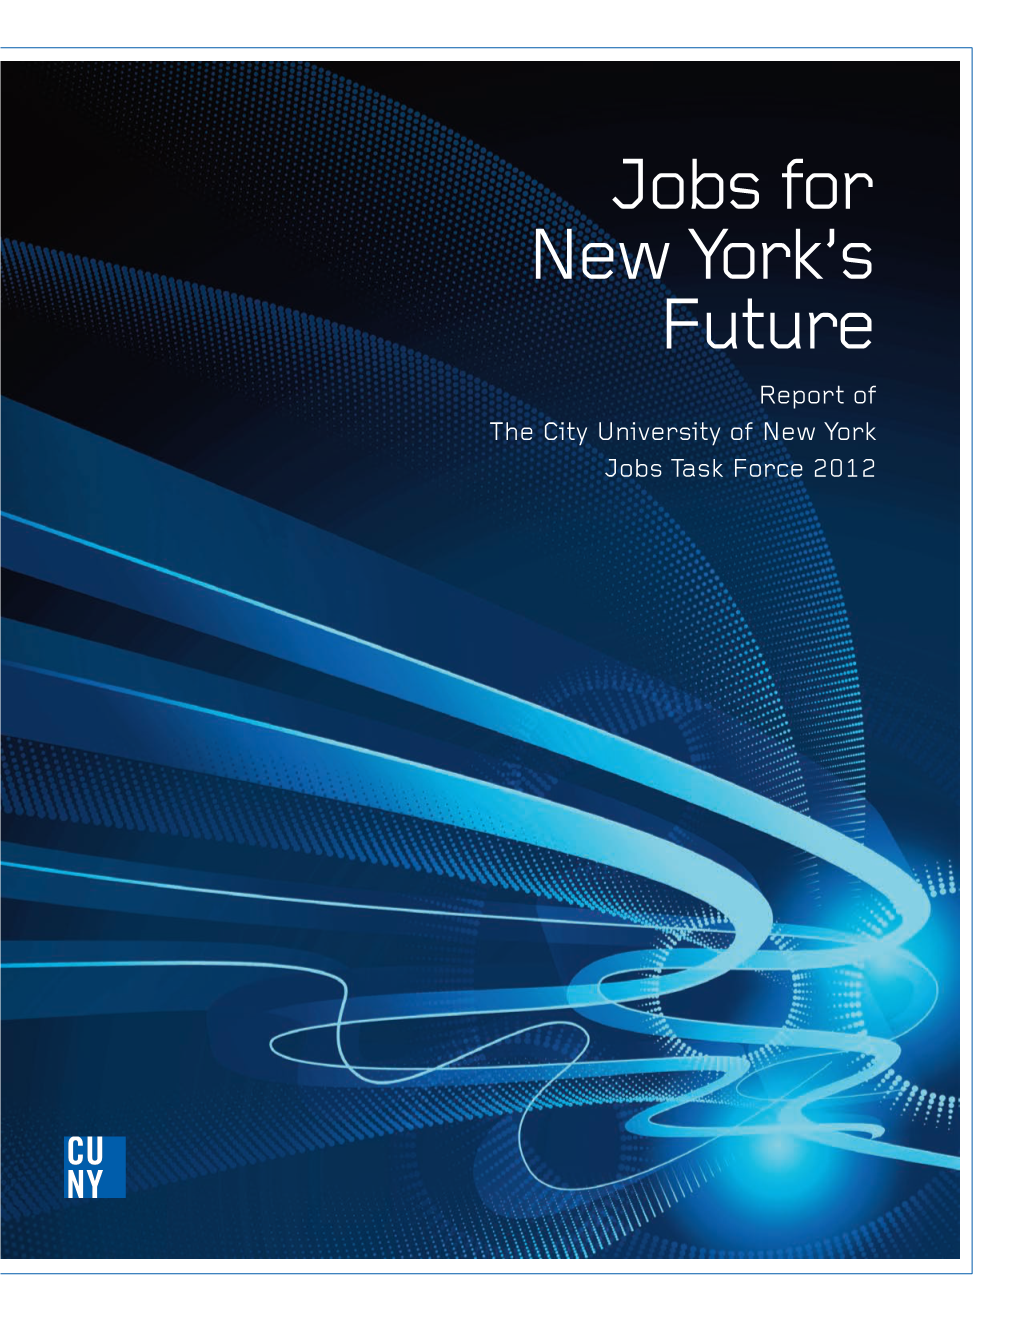 Jobs for New York's Future